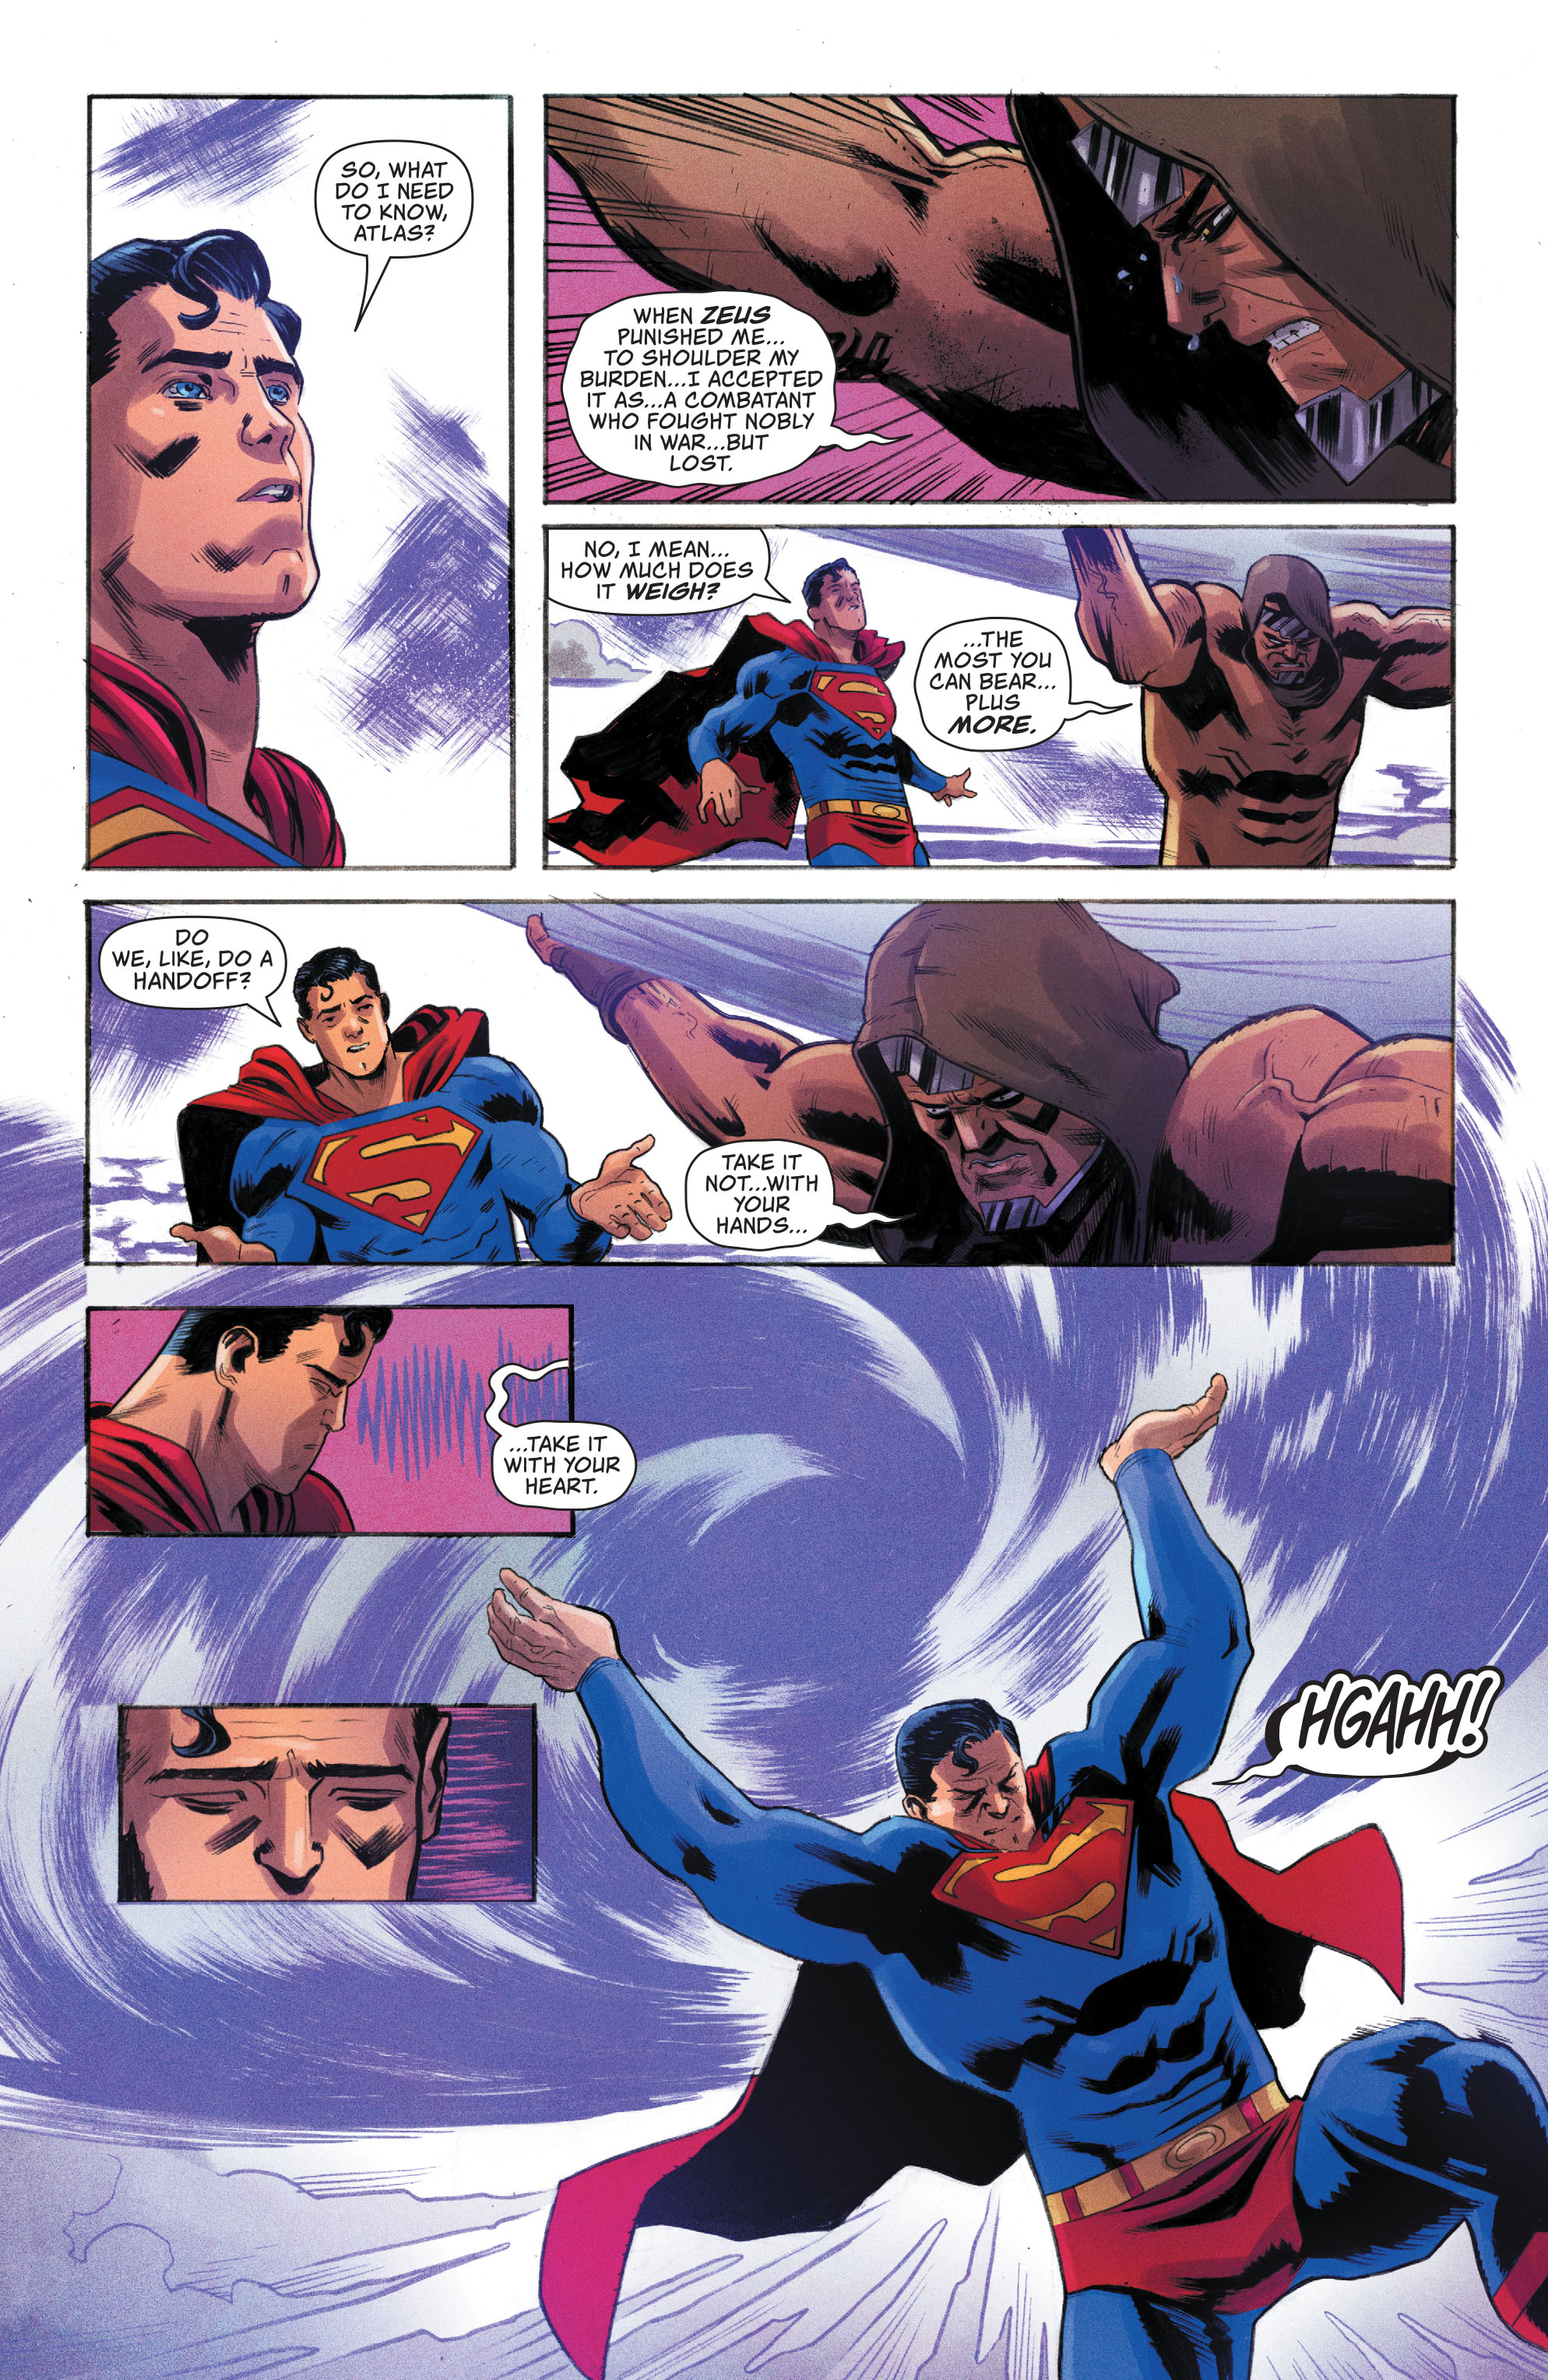 Superman: Man of Tomorrow (2020-): Chapter 12 - Page 5